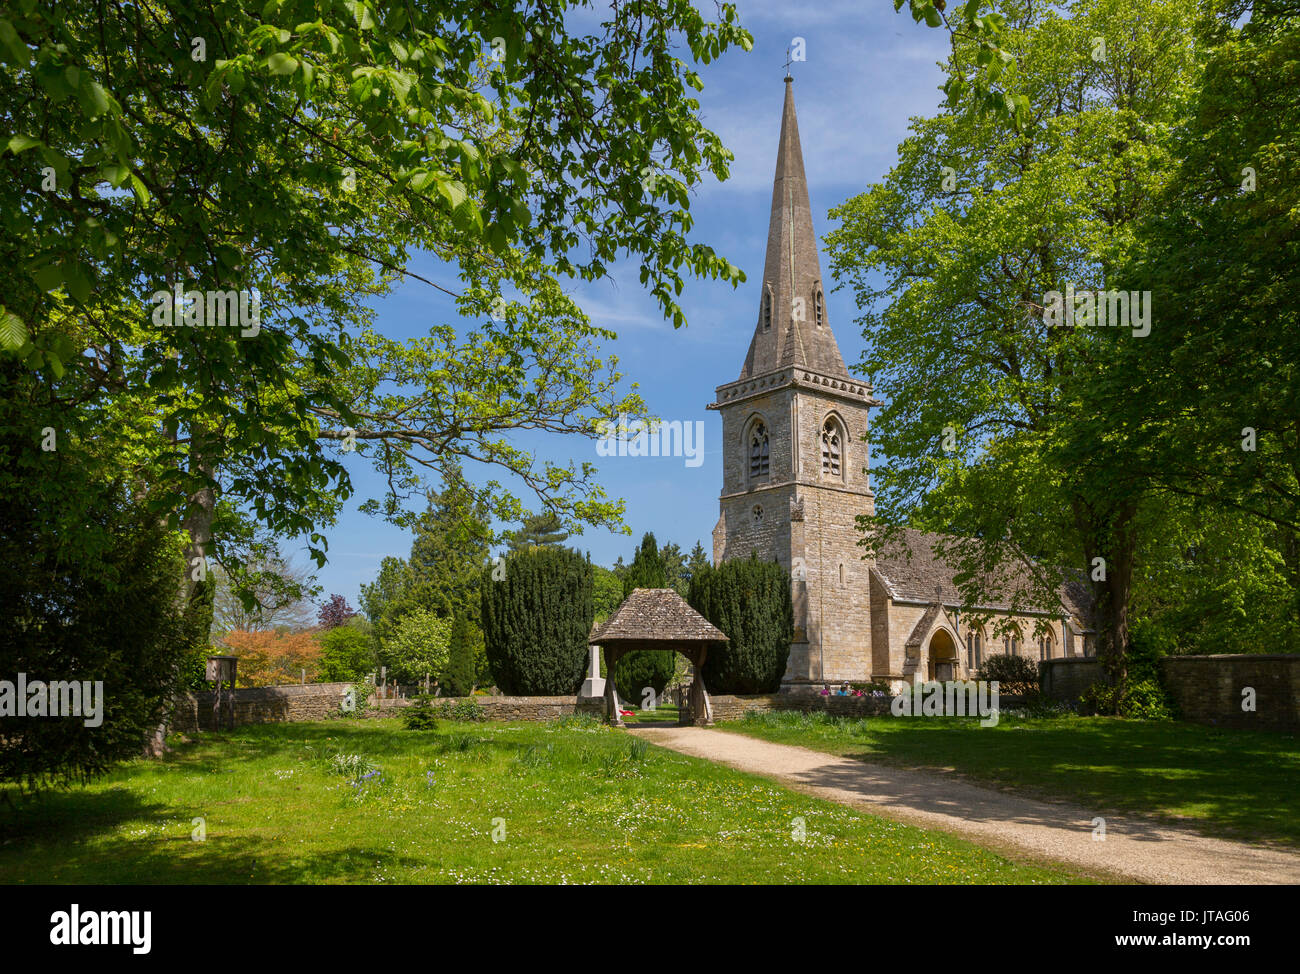 St. Mary's Parish Church in Lower Slaughter, Cotswolds, Gloucestershire, England, United Kingdom, Europe Stock Photo